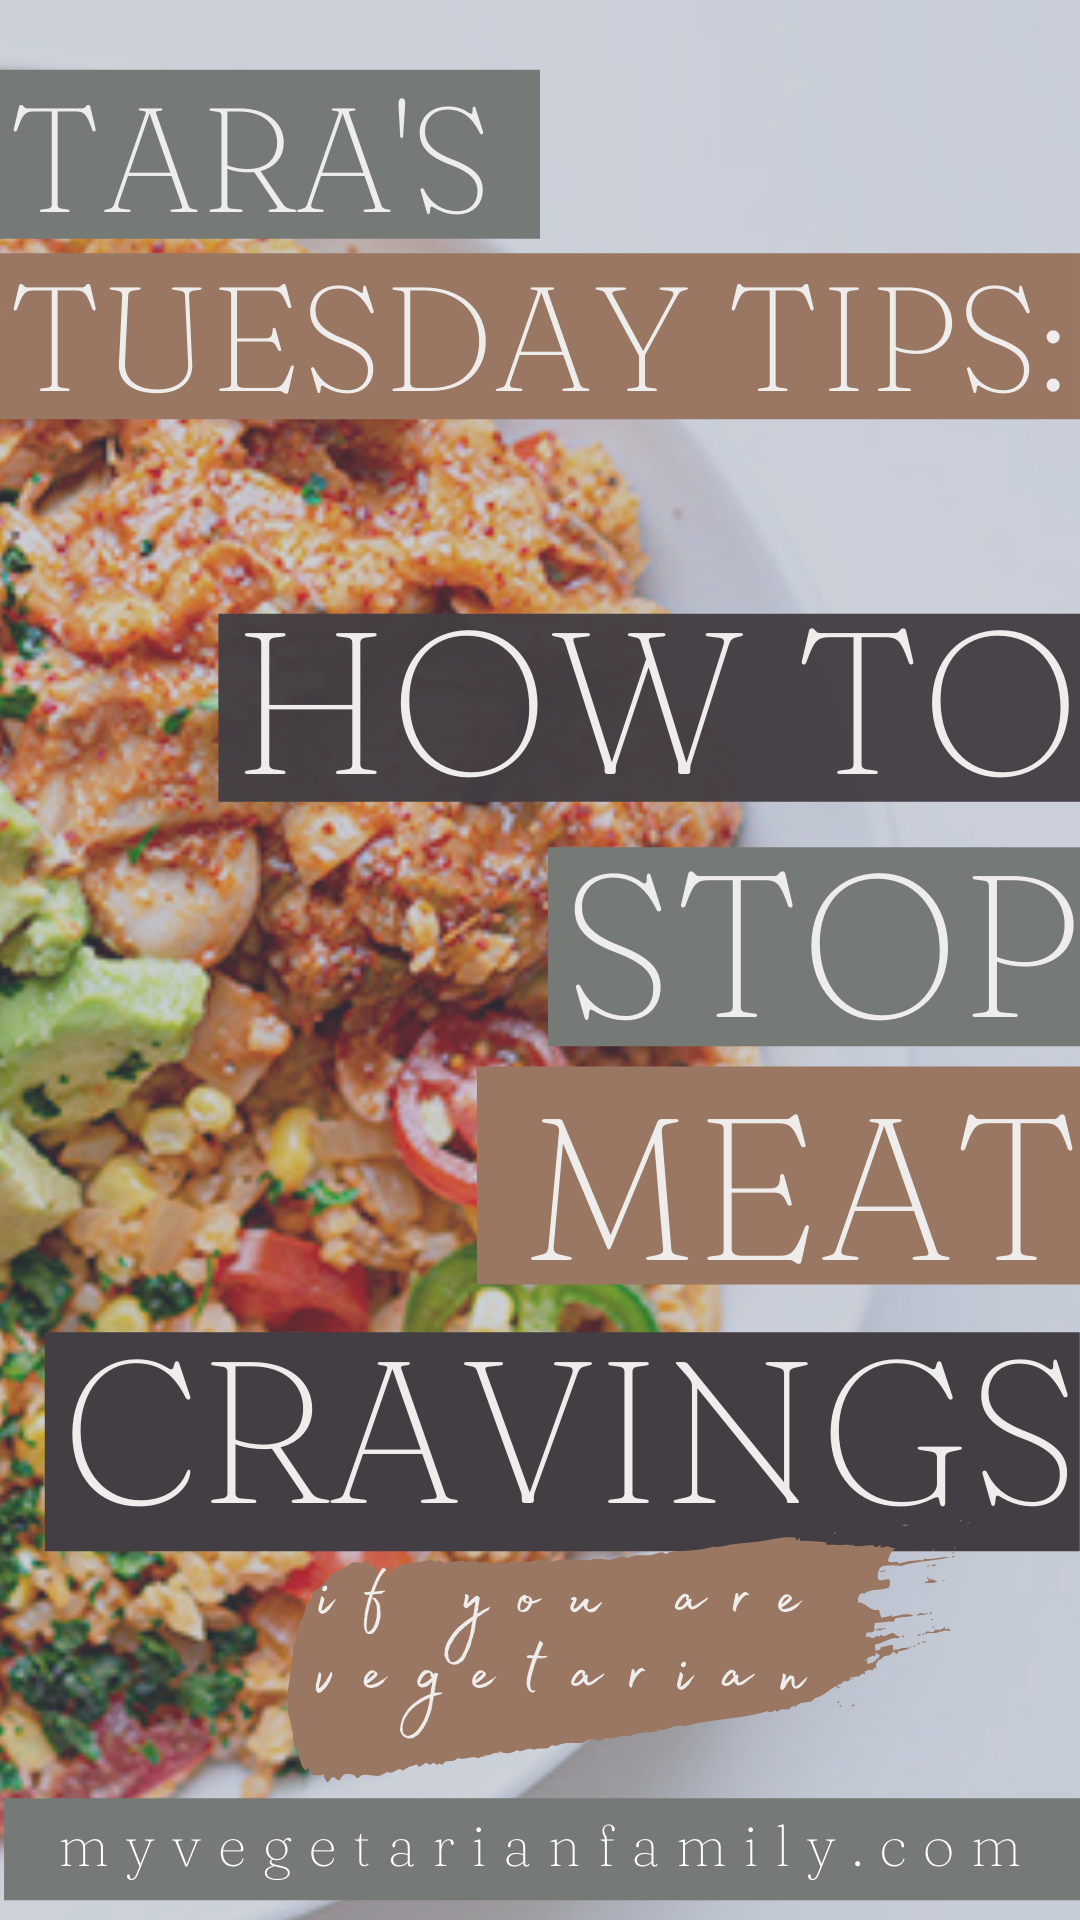 How To Stop Meat Cravings Meat as a Vegetarian | Tara's Tuesday Tips | My Vegetarian Family #nutritiontips #tarastuesdaytips #meatcravingsasavegetarian